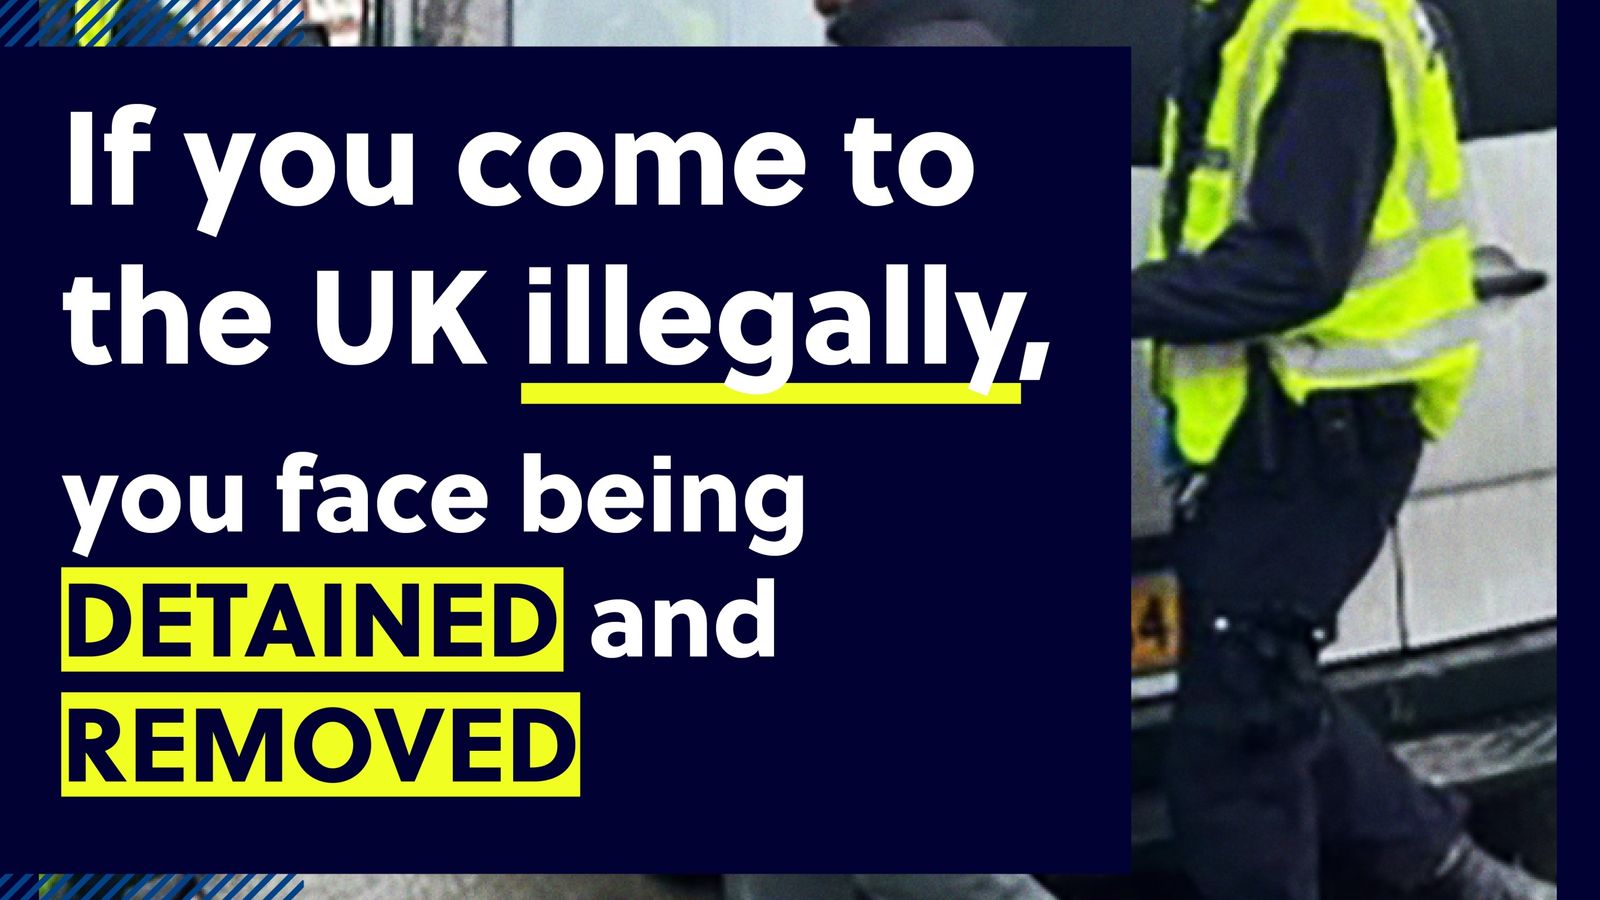 Home Office launches ad campaign to put off illegal Albanian migrants - as critics brand move 'pointless'